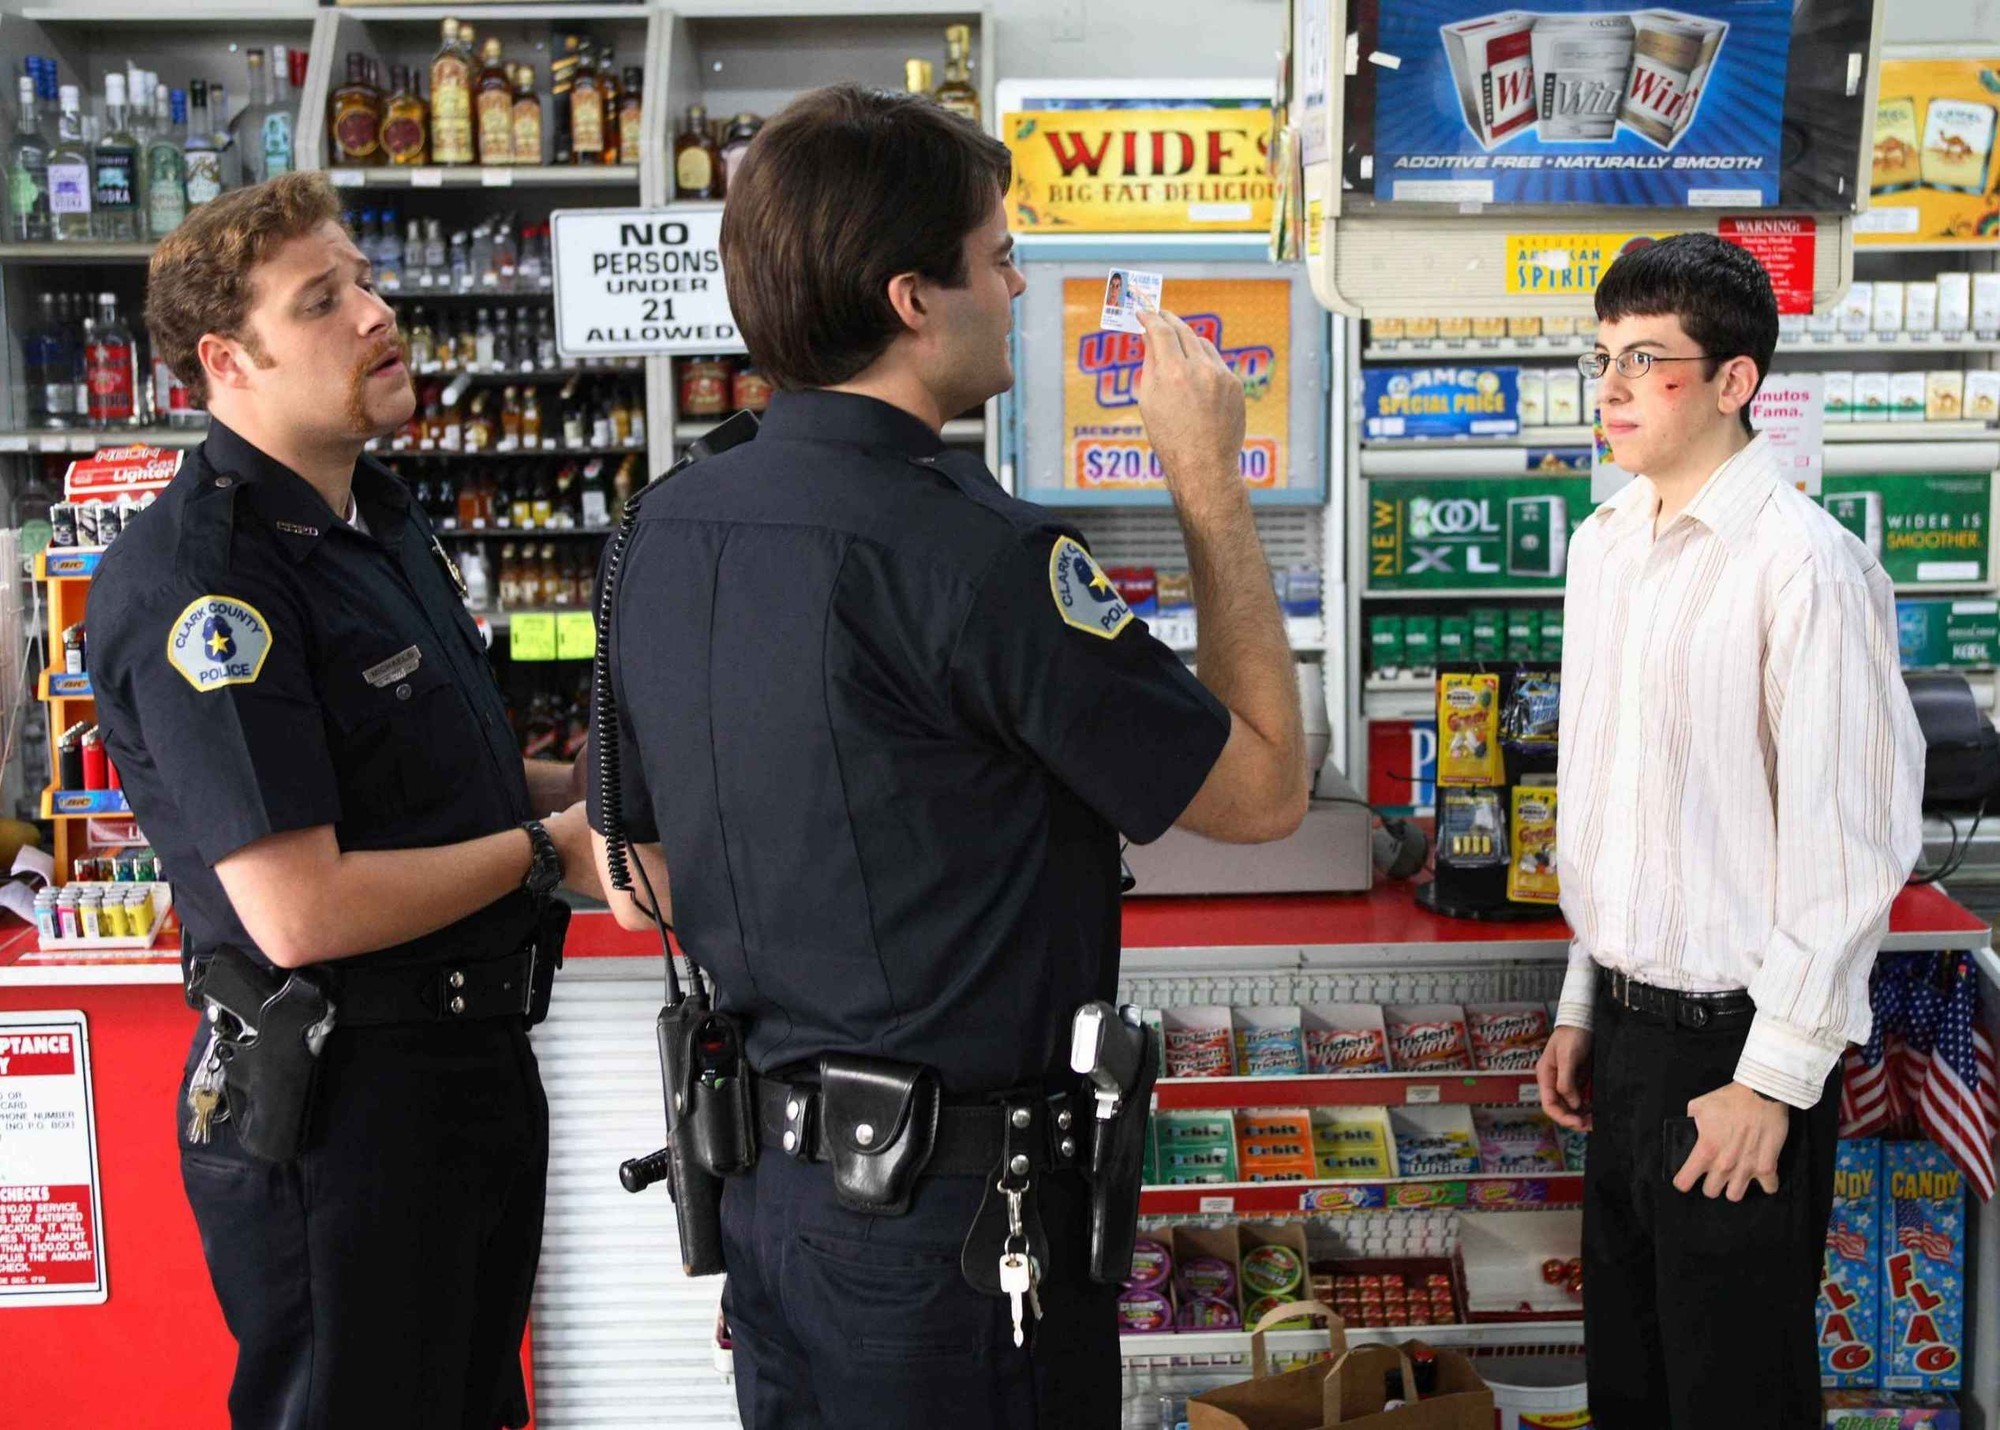 5 Ways To Avoid Getting Busted For Weed